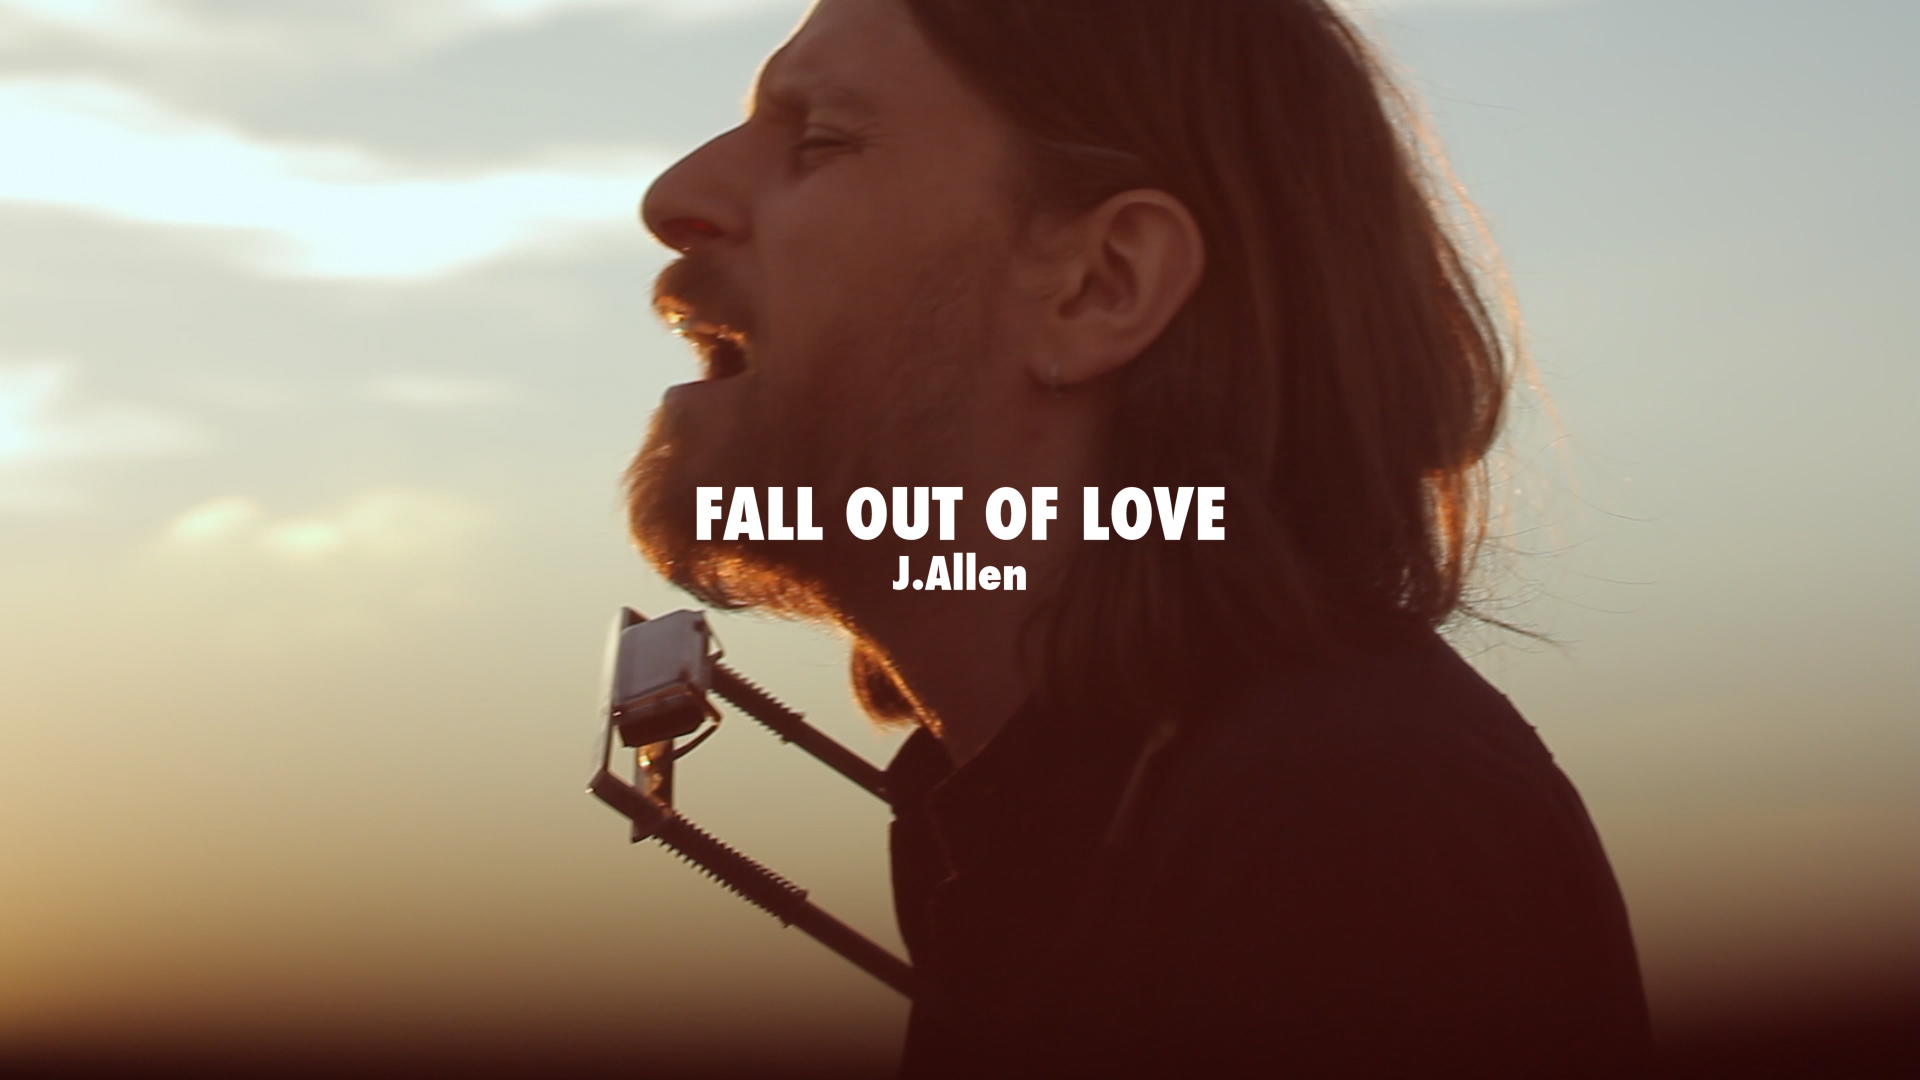 J. Allen - Fall Ouf Of Love for Record New York